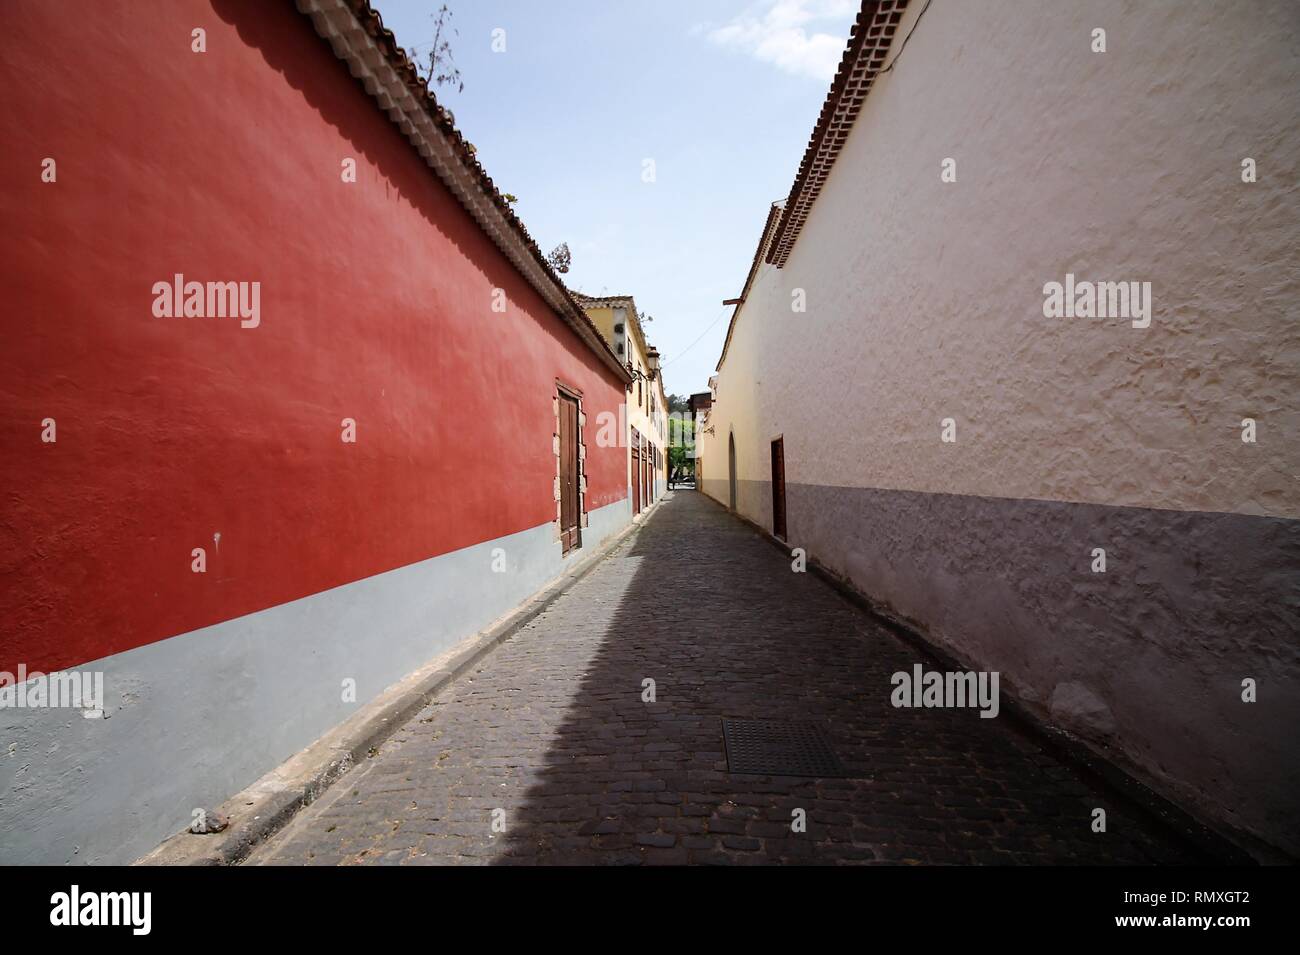 A narrow passageway between red and white walls. Long and narrow street with colored walls. Wide angle shot street on La Laguna, Tenerife. Stock Photo